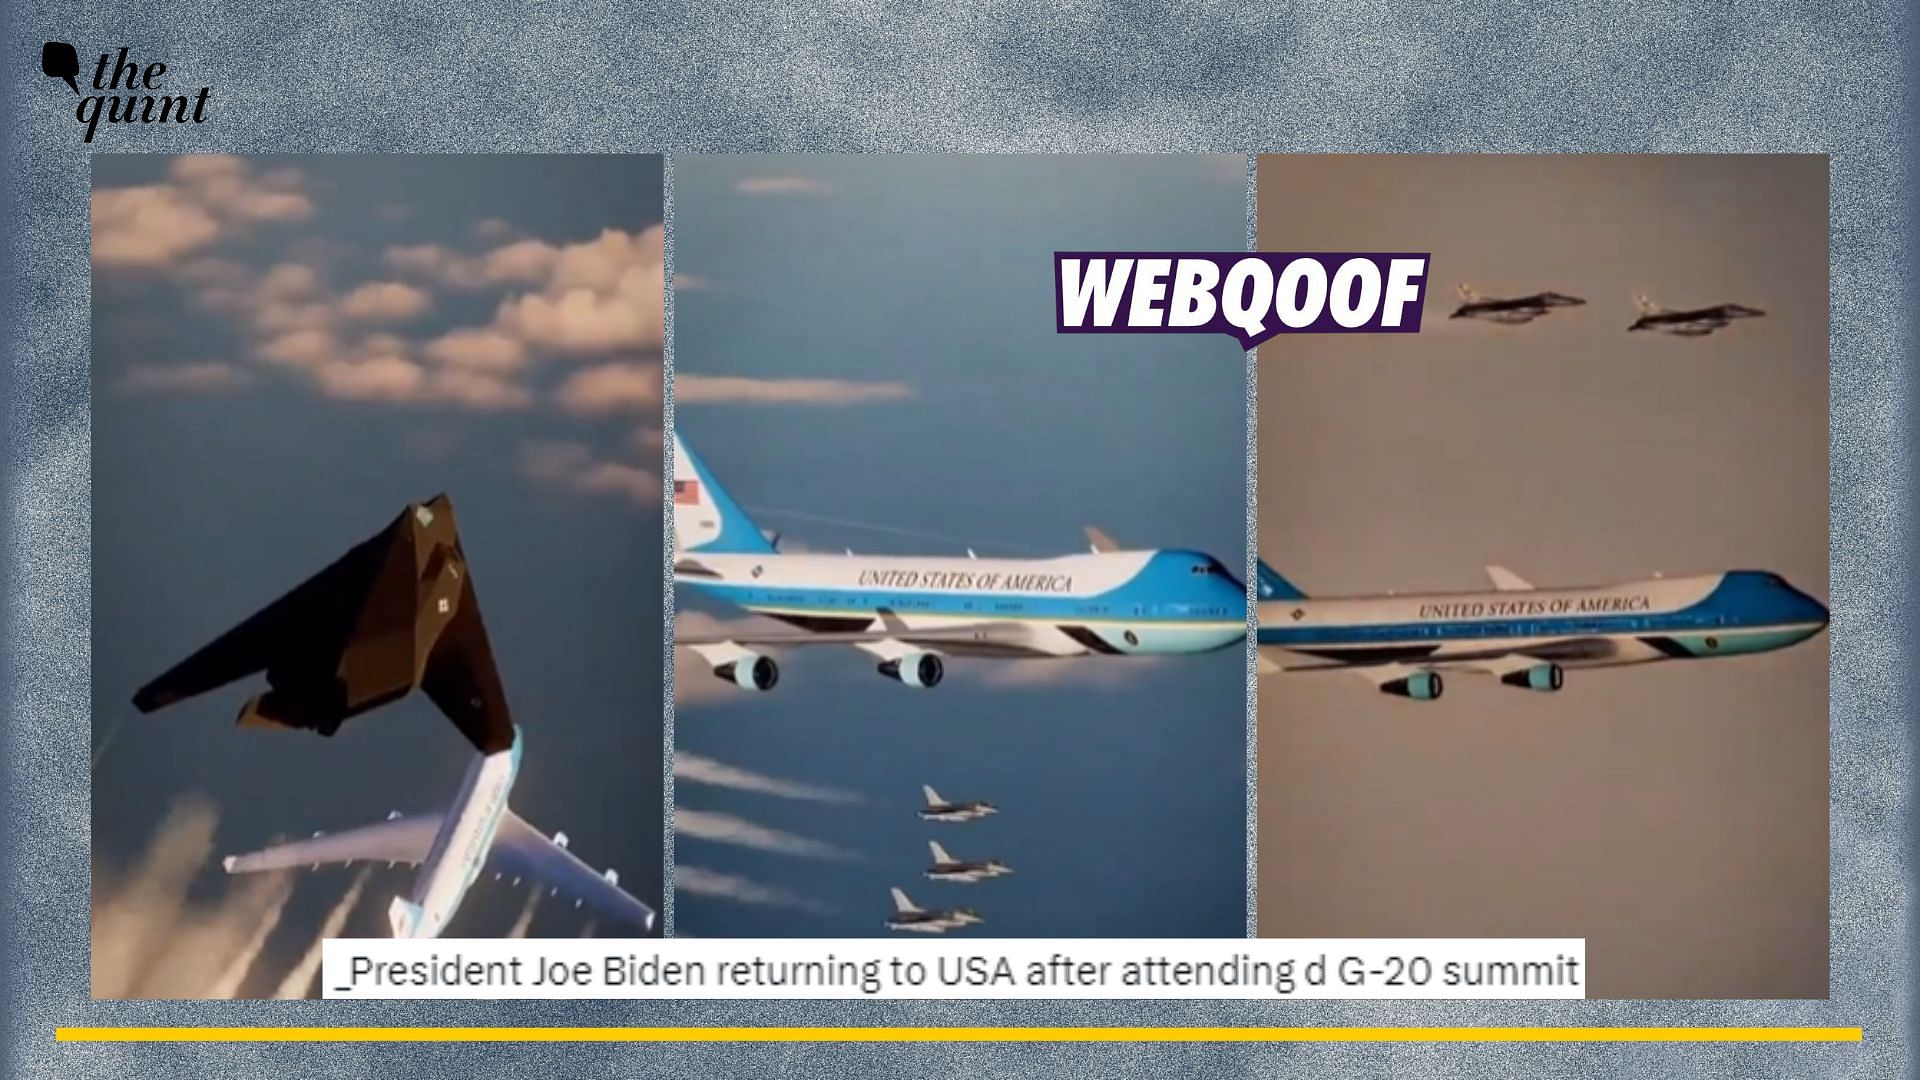 Does Biden's Fake Air Force One Prove He Is Not Really President?